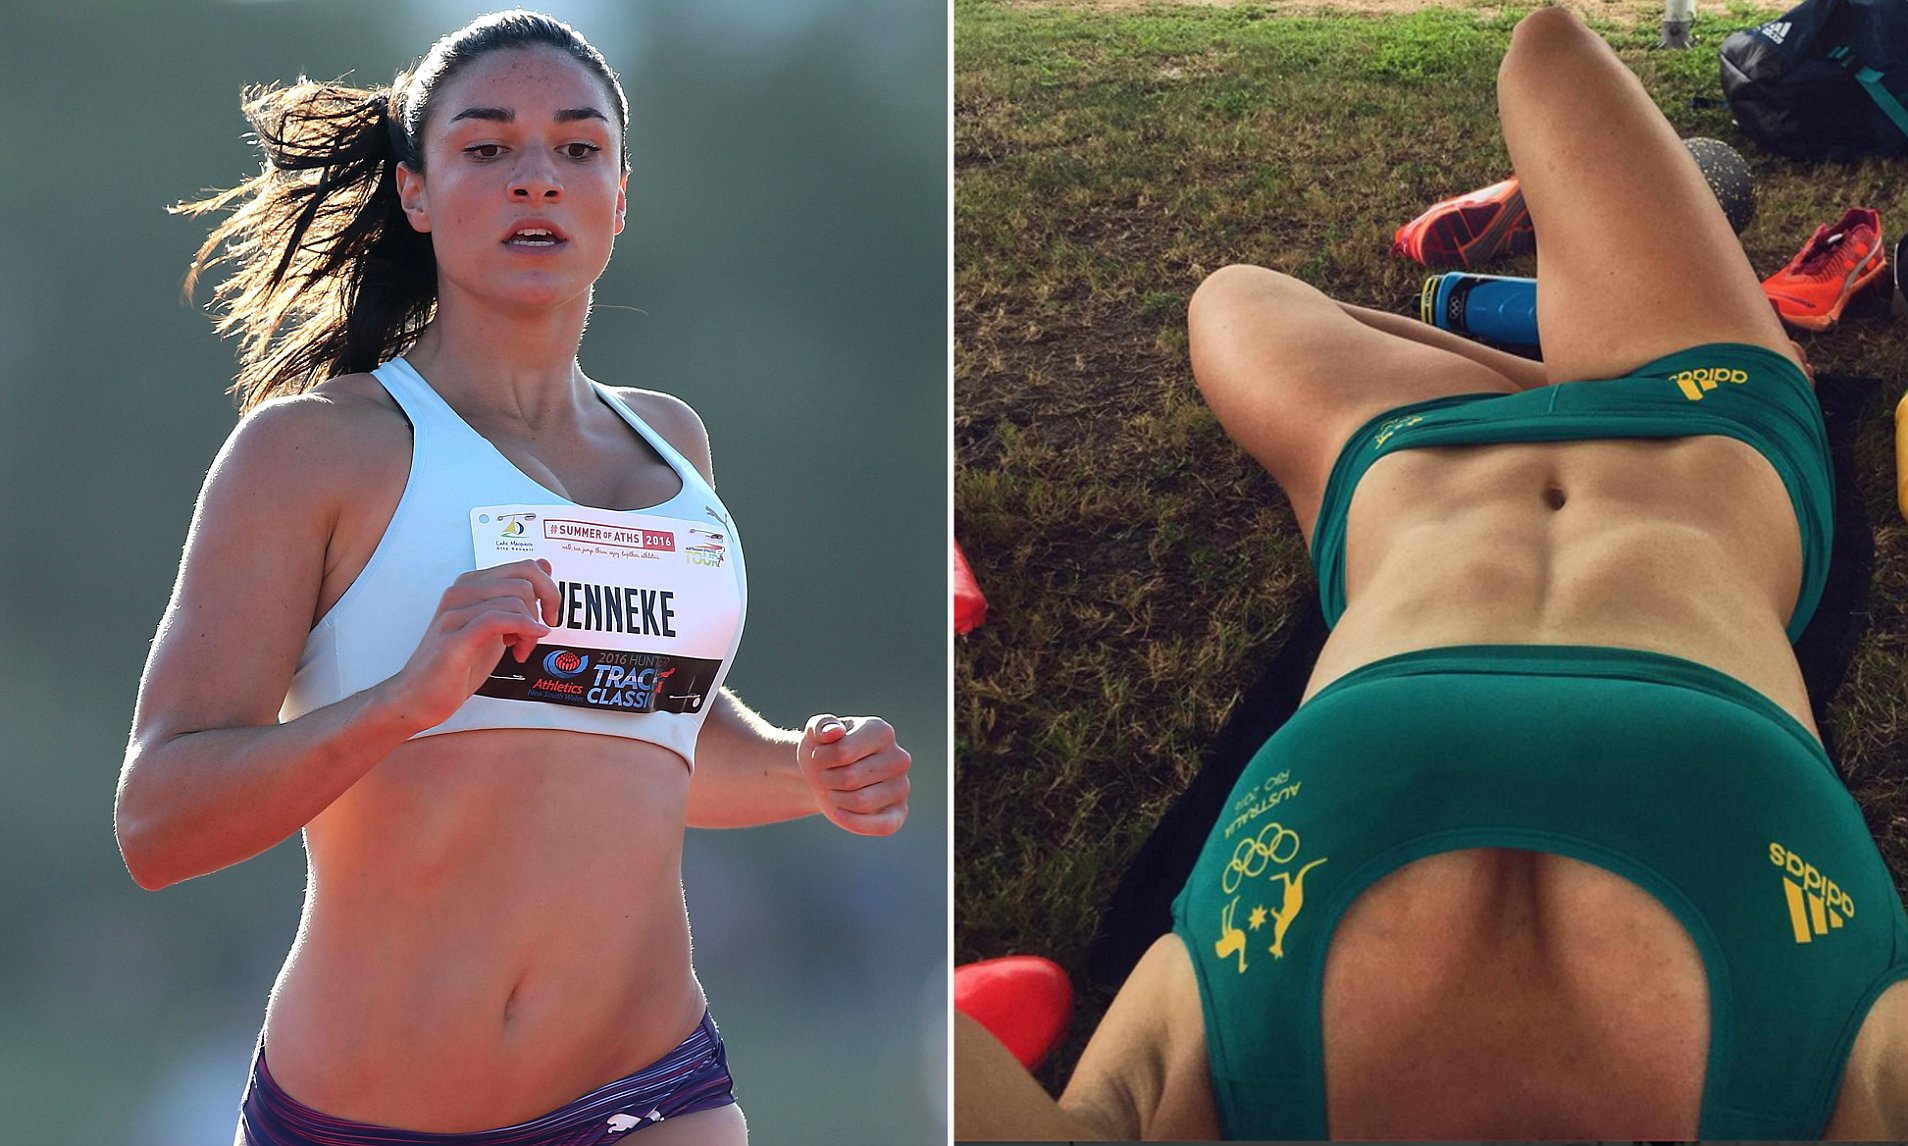 charles eckhardt recommends Michelle Jenneke Sexy